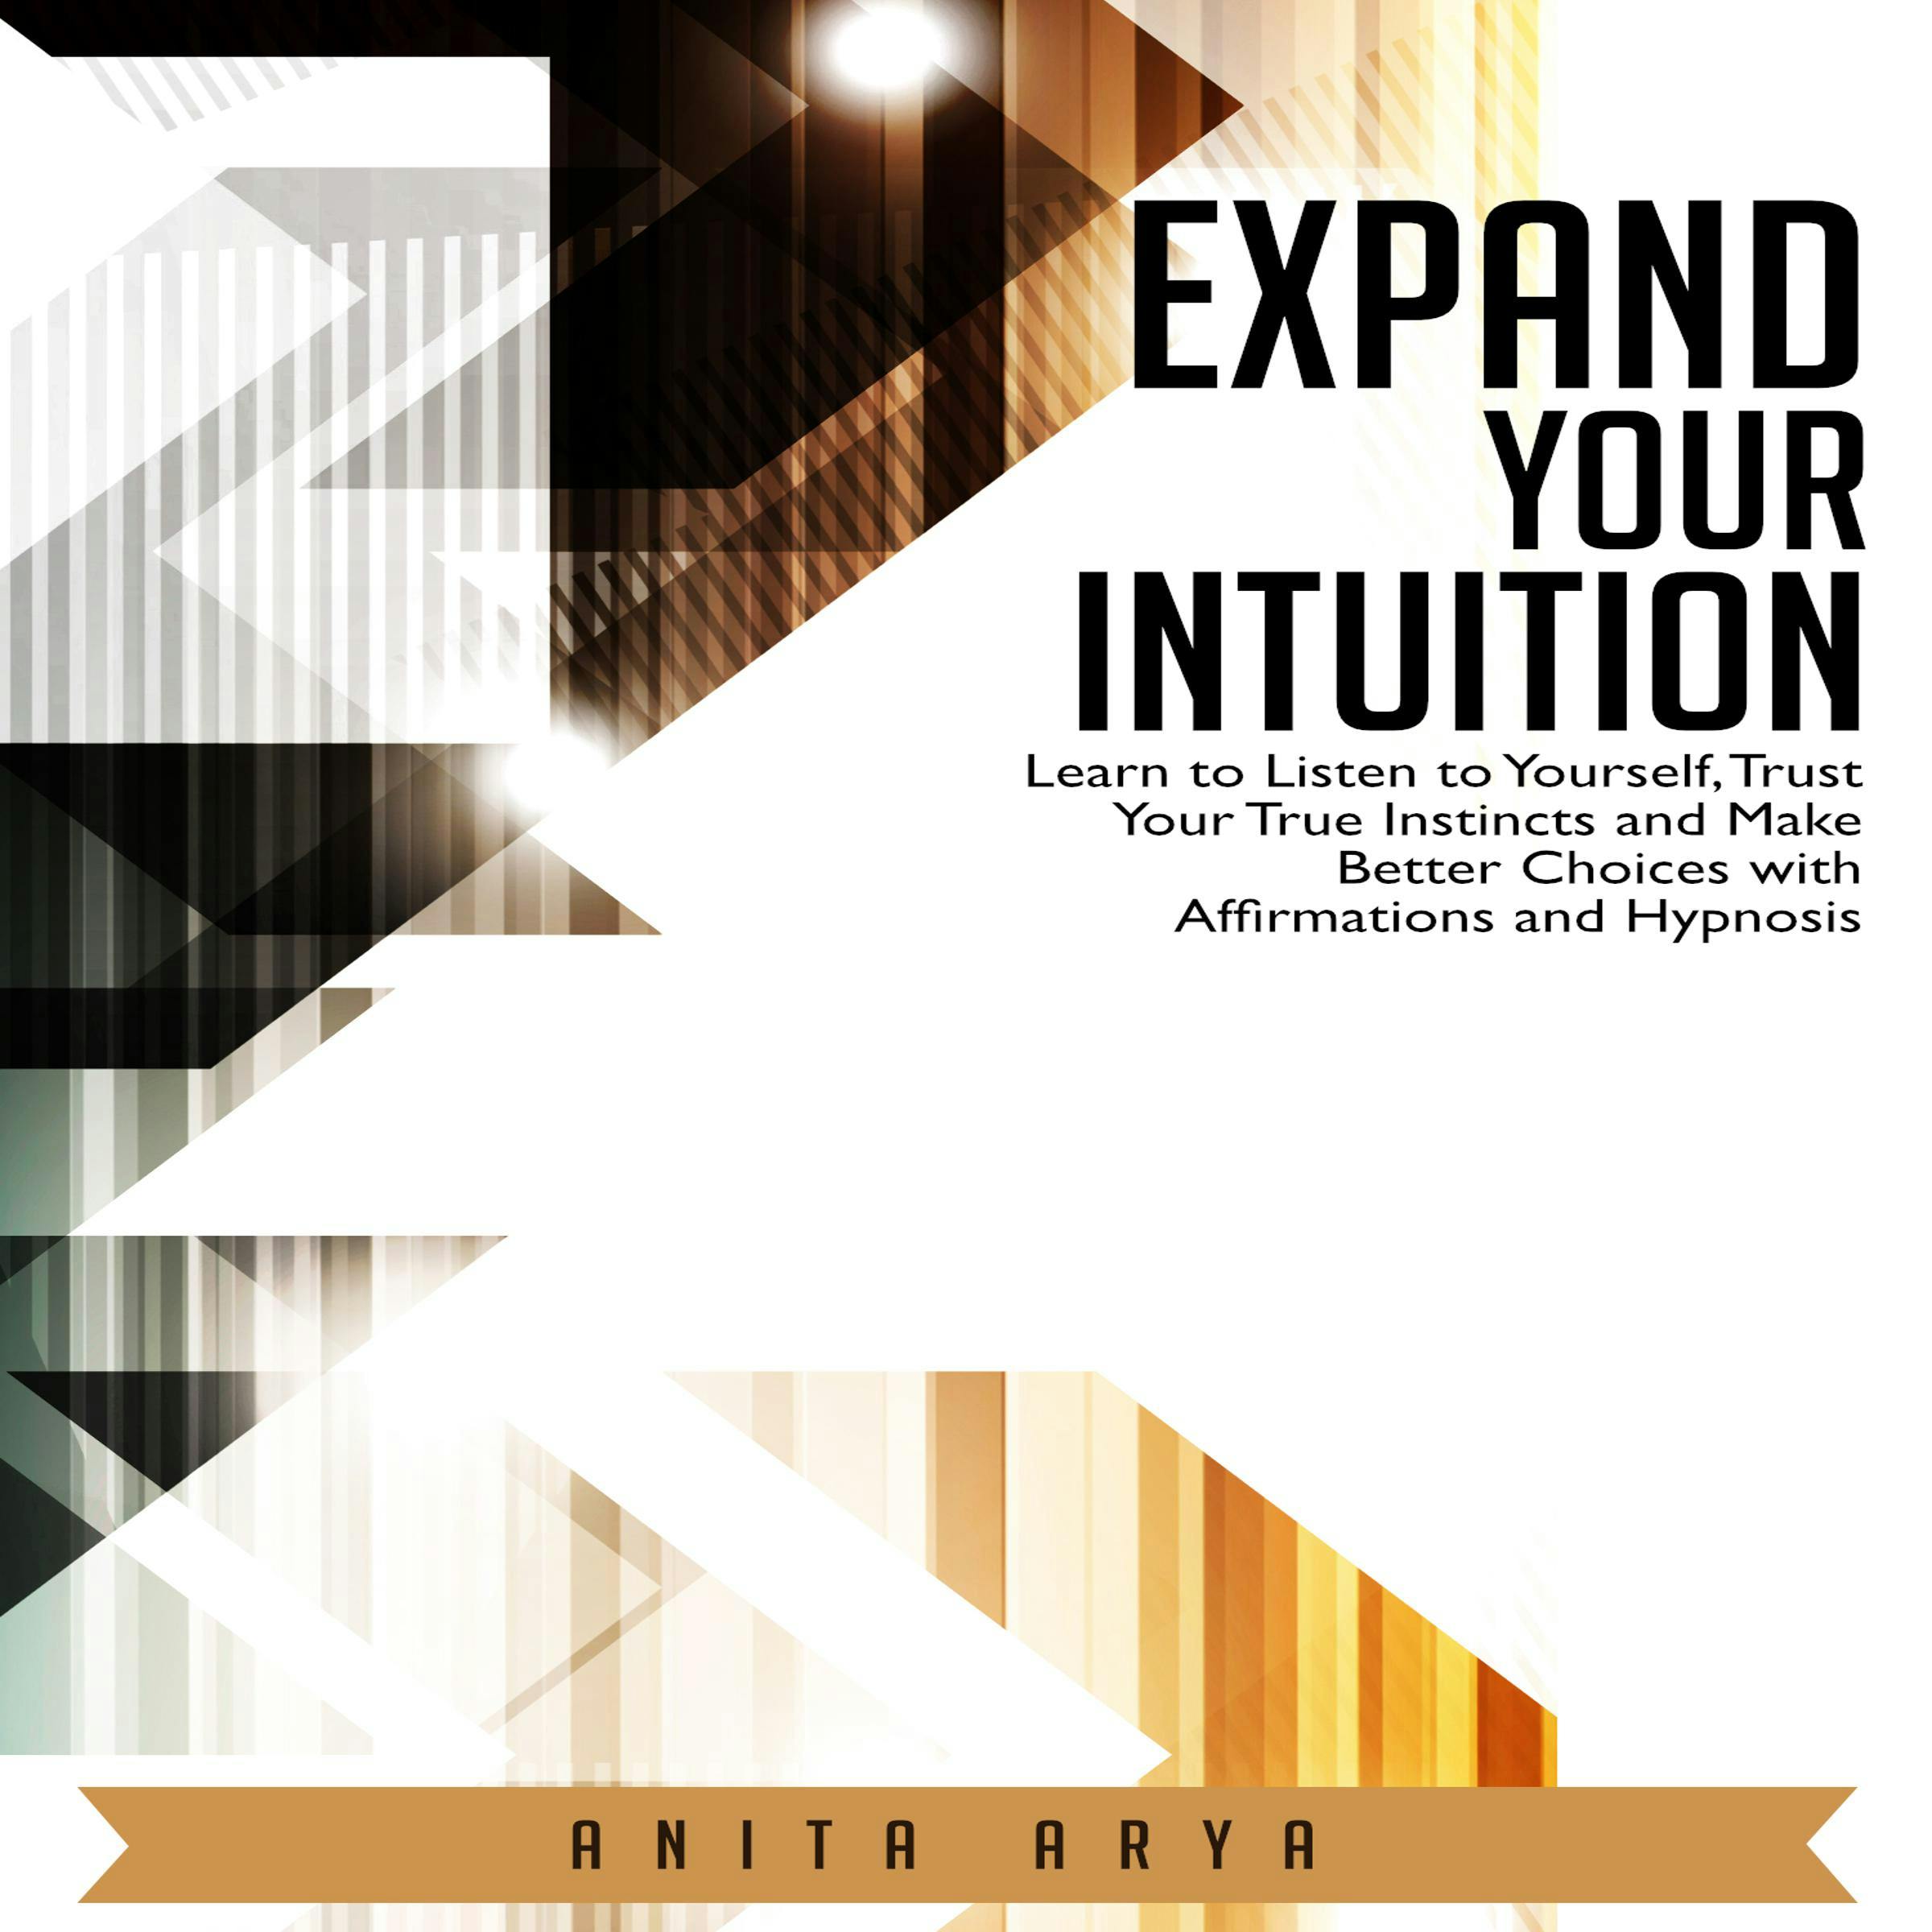 Expand Your Intuition: Learn to Listen to Yourself, Trust Your True Instincts and Make Better Choices with Affirmations and Hypnosis - Anita Arya